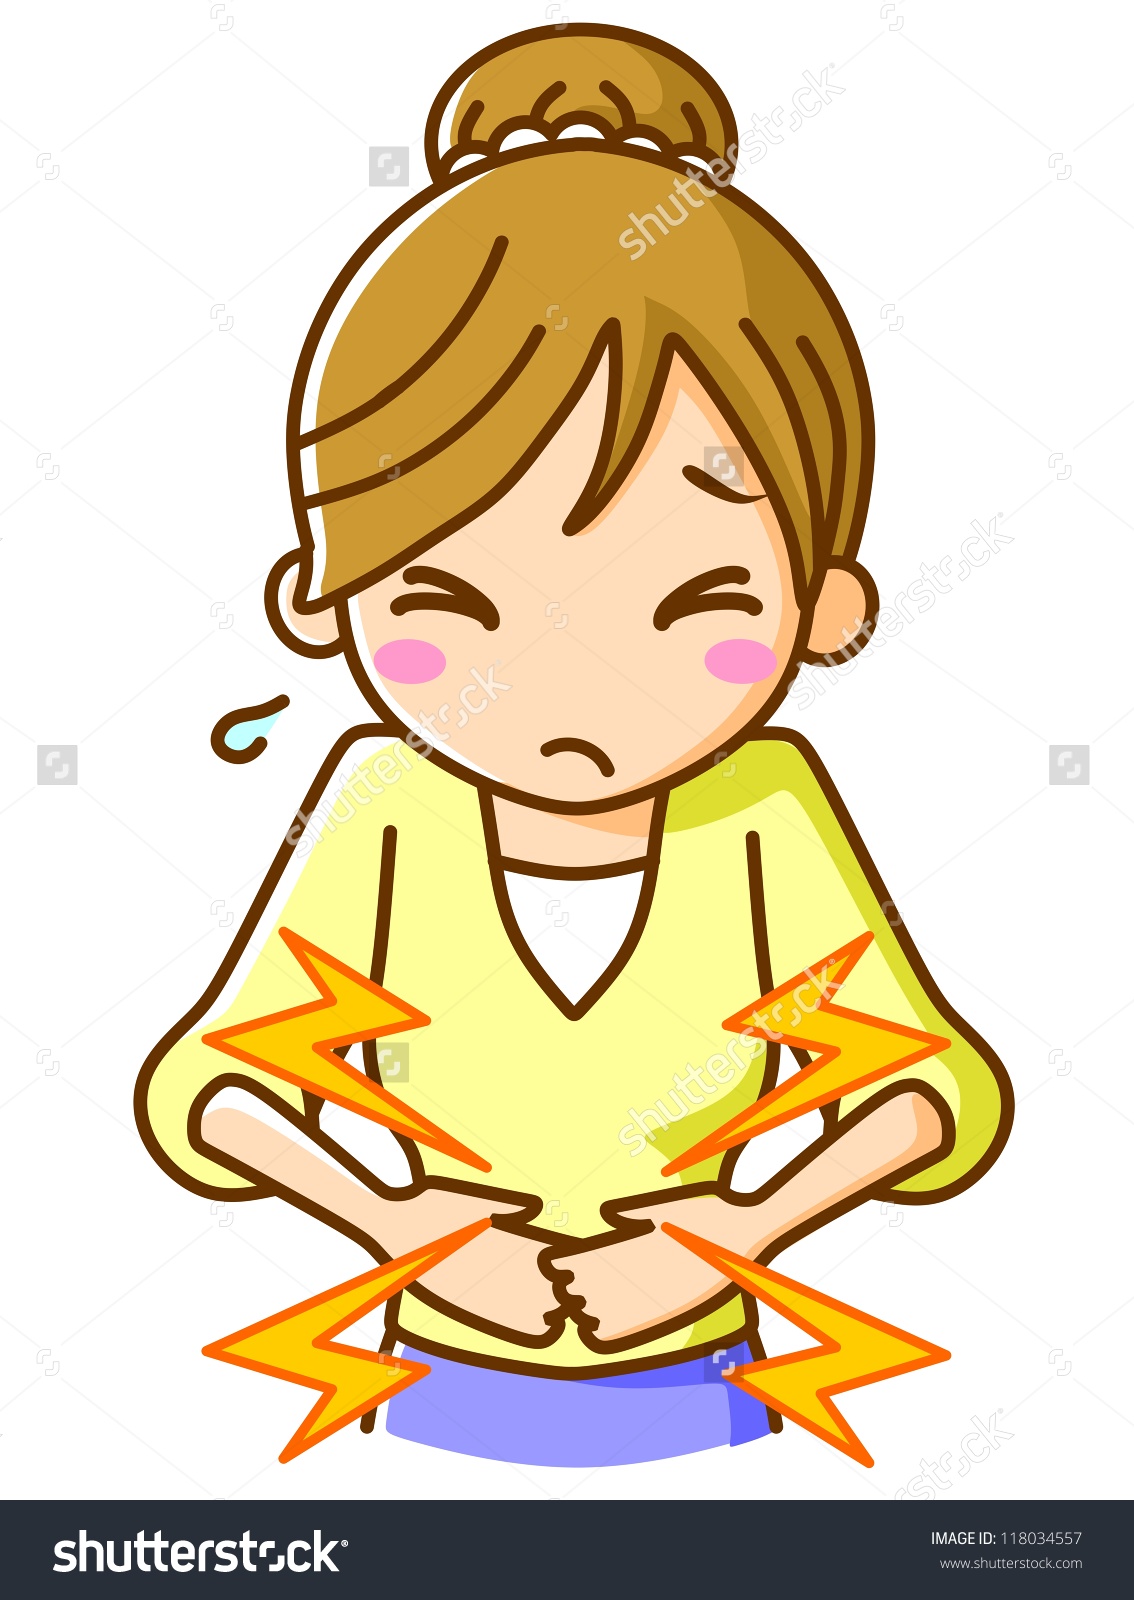 Stomach pain clipart.